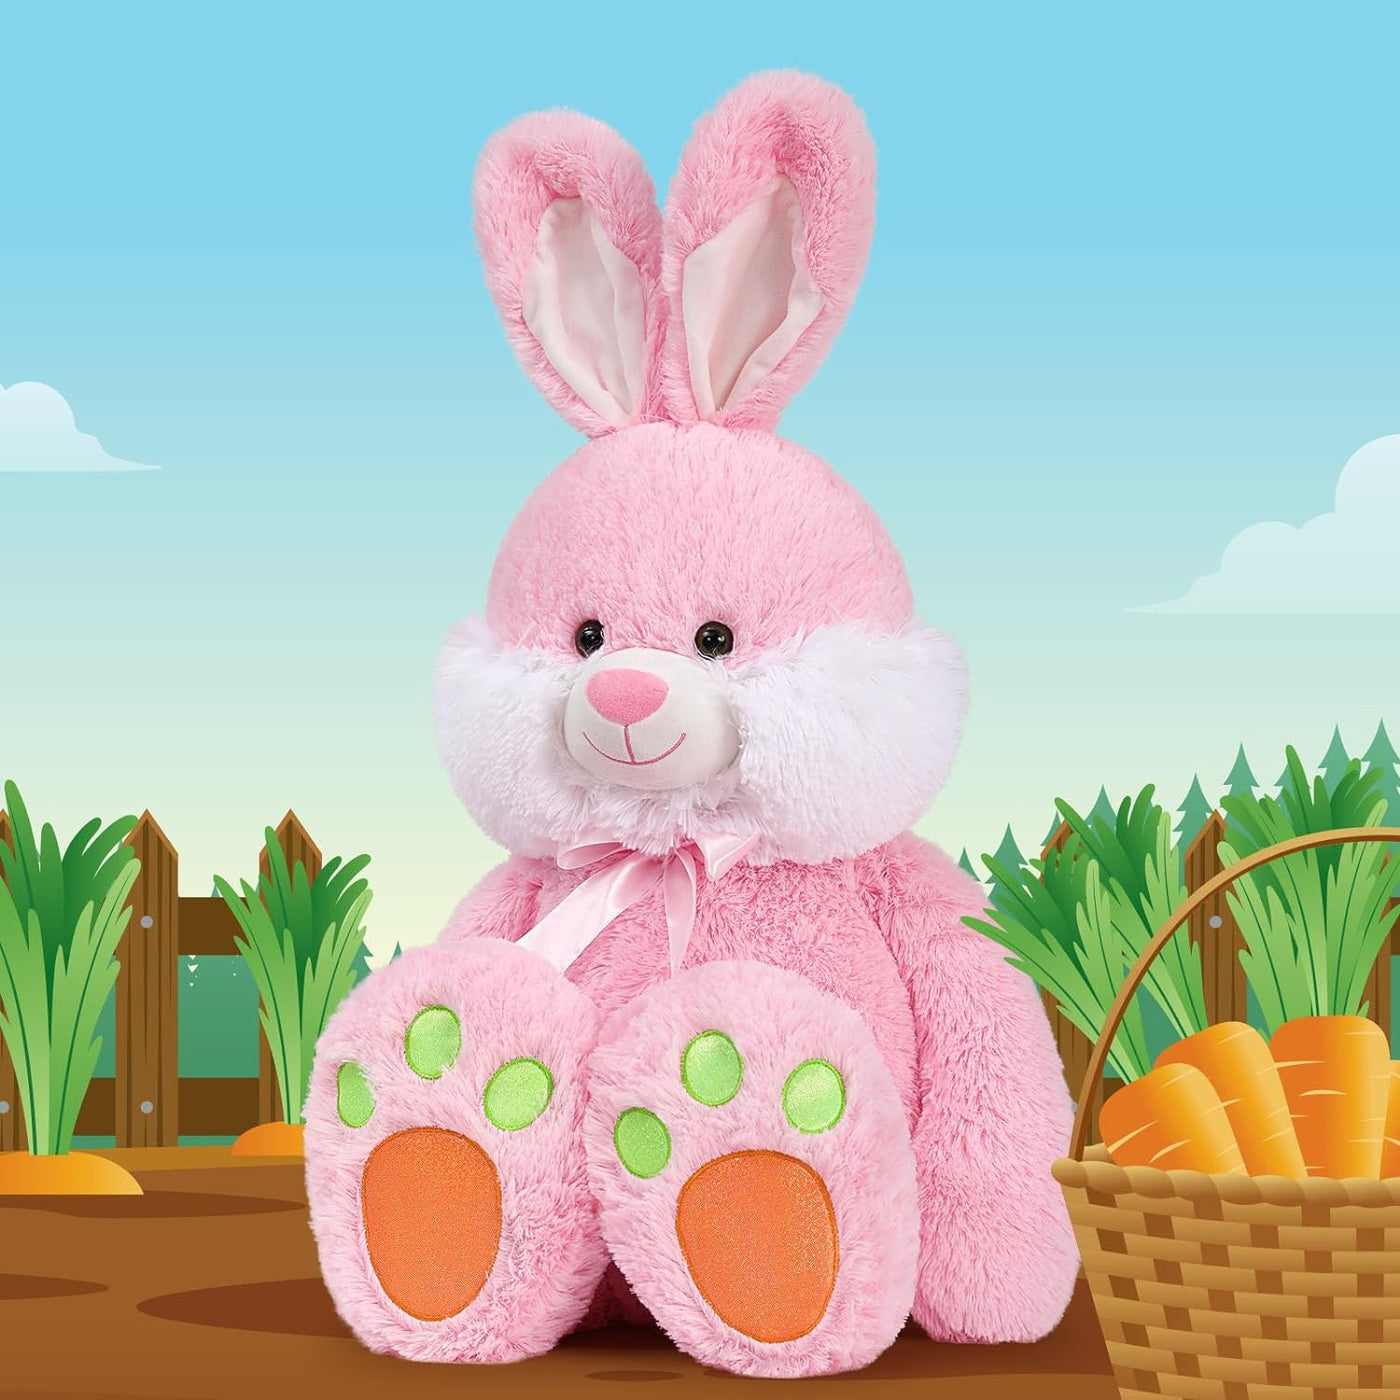 Giant Rabbit Plush Toy, Pink, 31.5 Inches